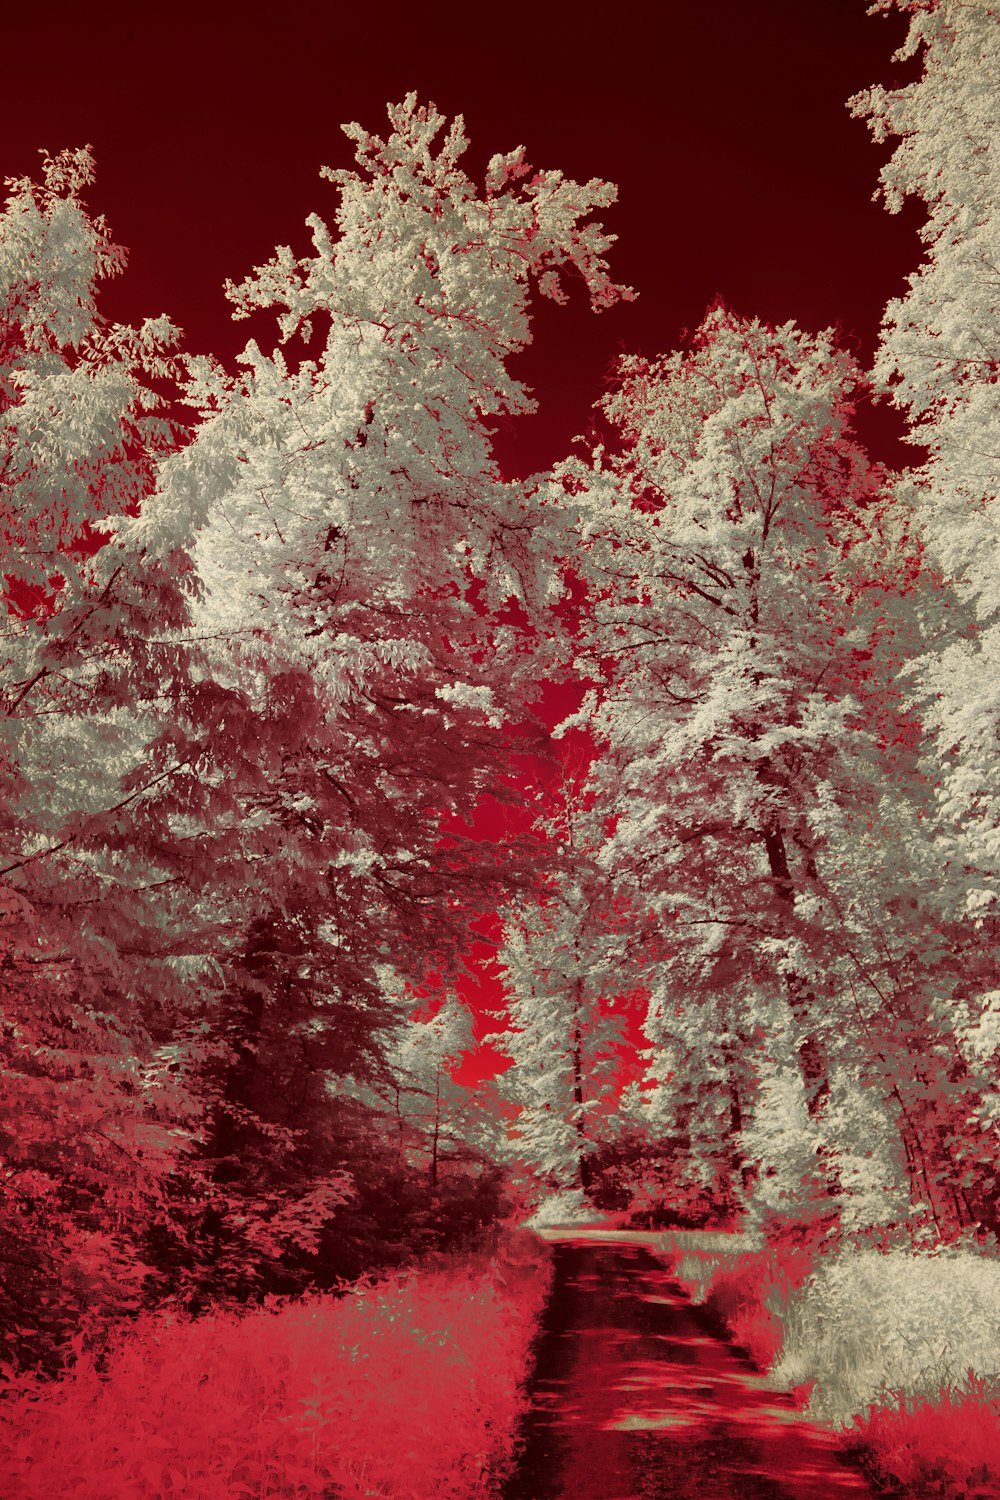 infrared image of a path in a forest